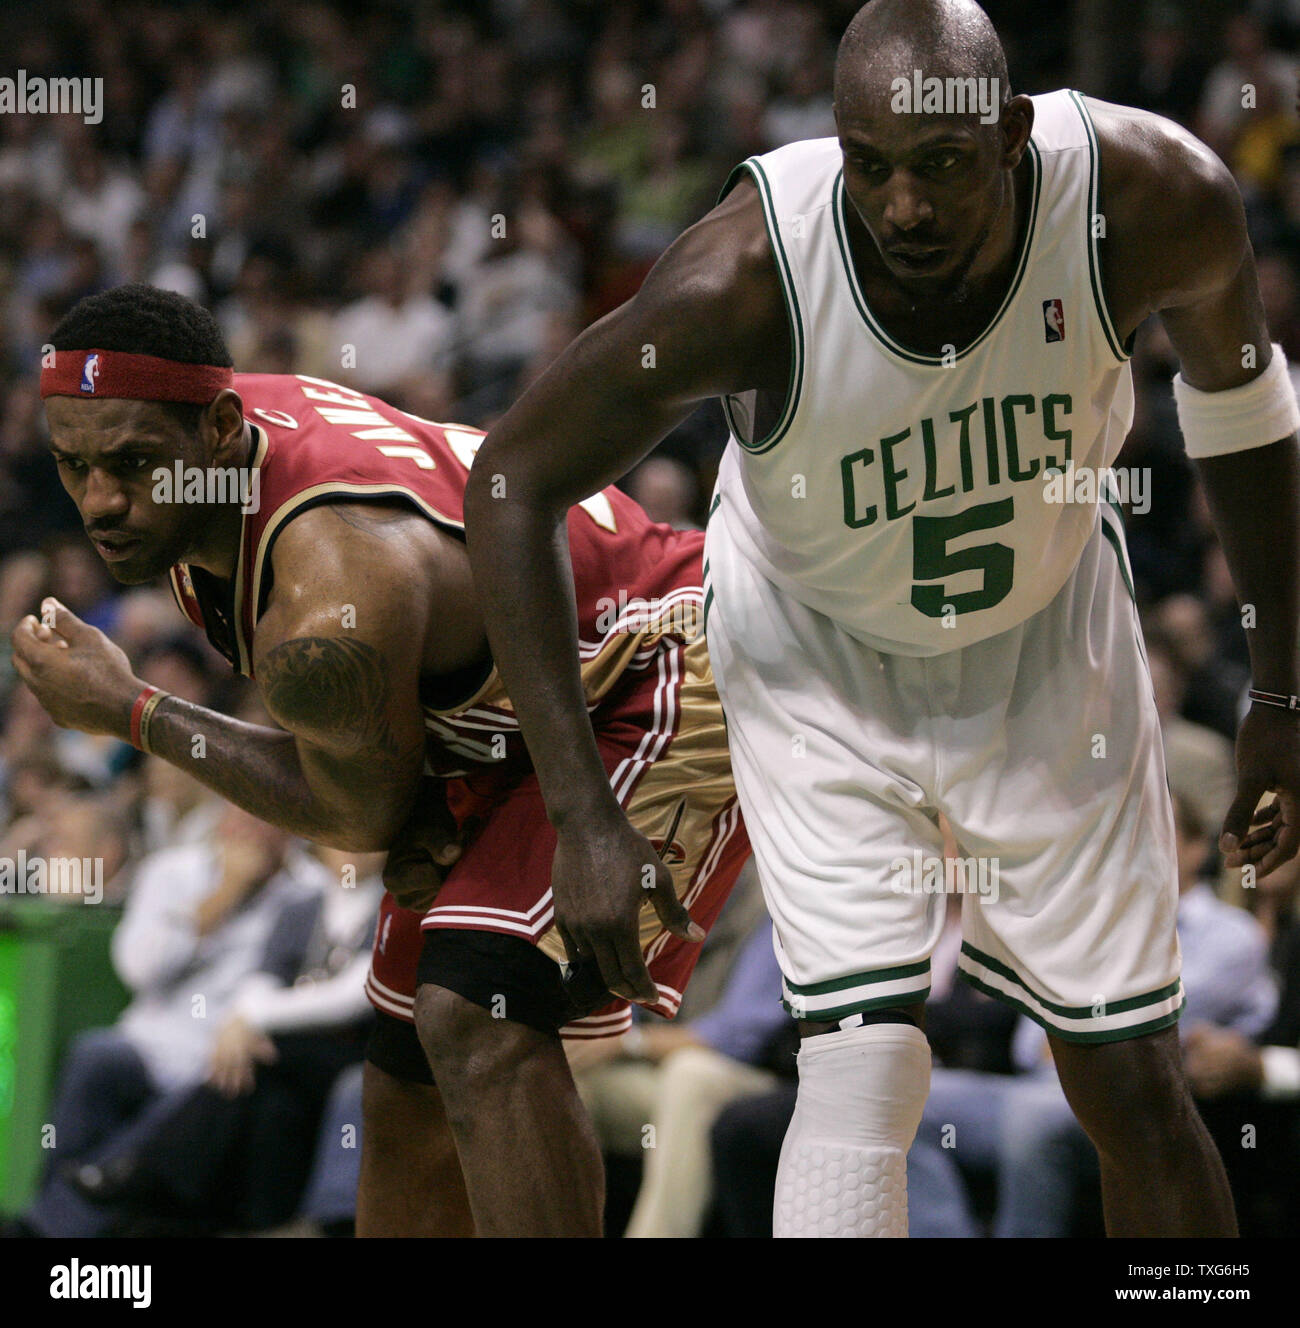 Cleveland Cavaliers forward LeBron James (23) and Boston Celtics forward Kevin Garnett (5) line up on the key during a Celtics free throw in the second half at the TD Garden in Boston, Massachusetts on February 25, 2010.  The Cavaliers defeated the Celtics 108-88.   UPI/Matthew Healey Stock Photo